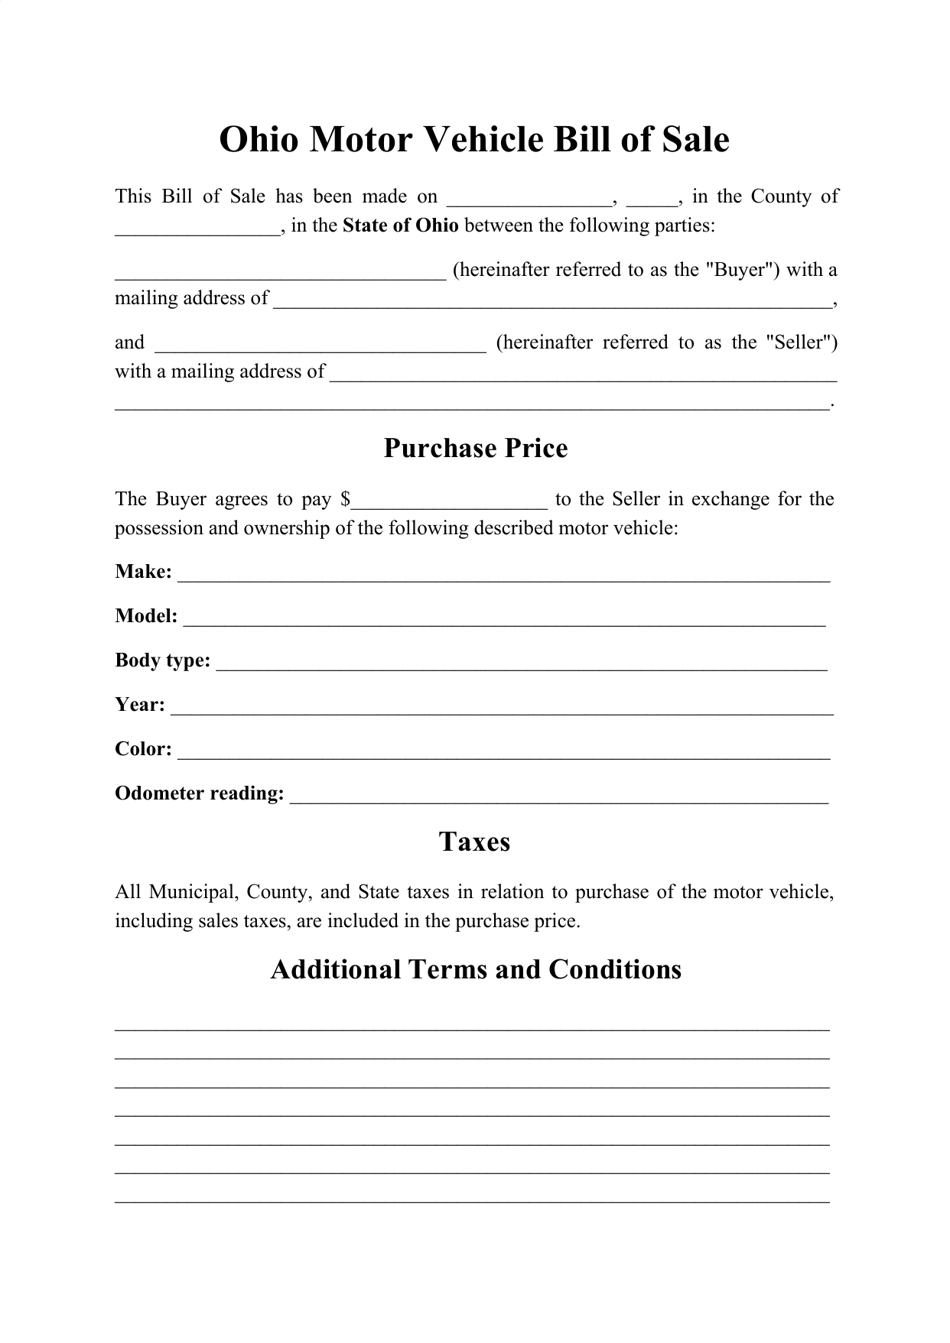 Ohio Motor Vehicle Bill of Sale Form Fill Out, Sign Online and